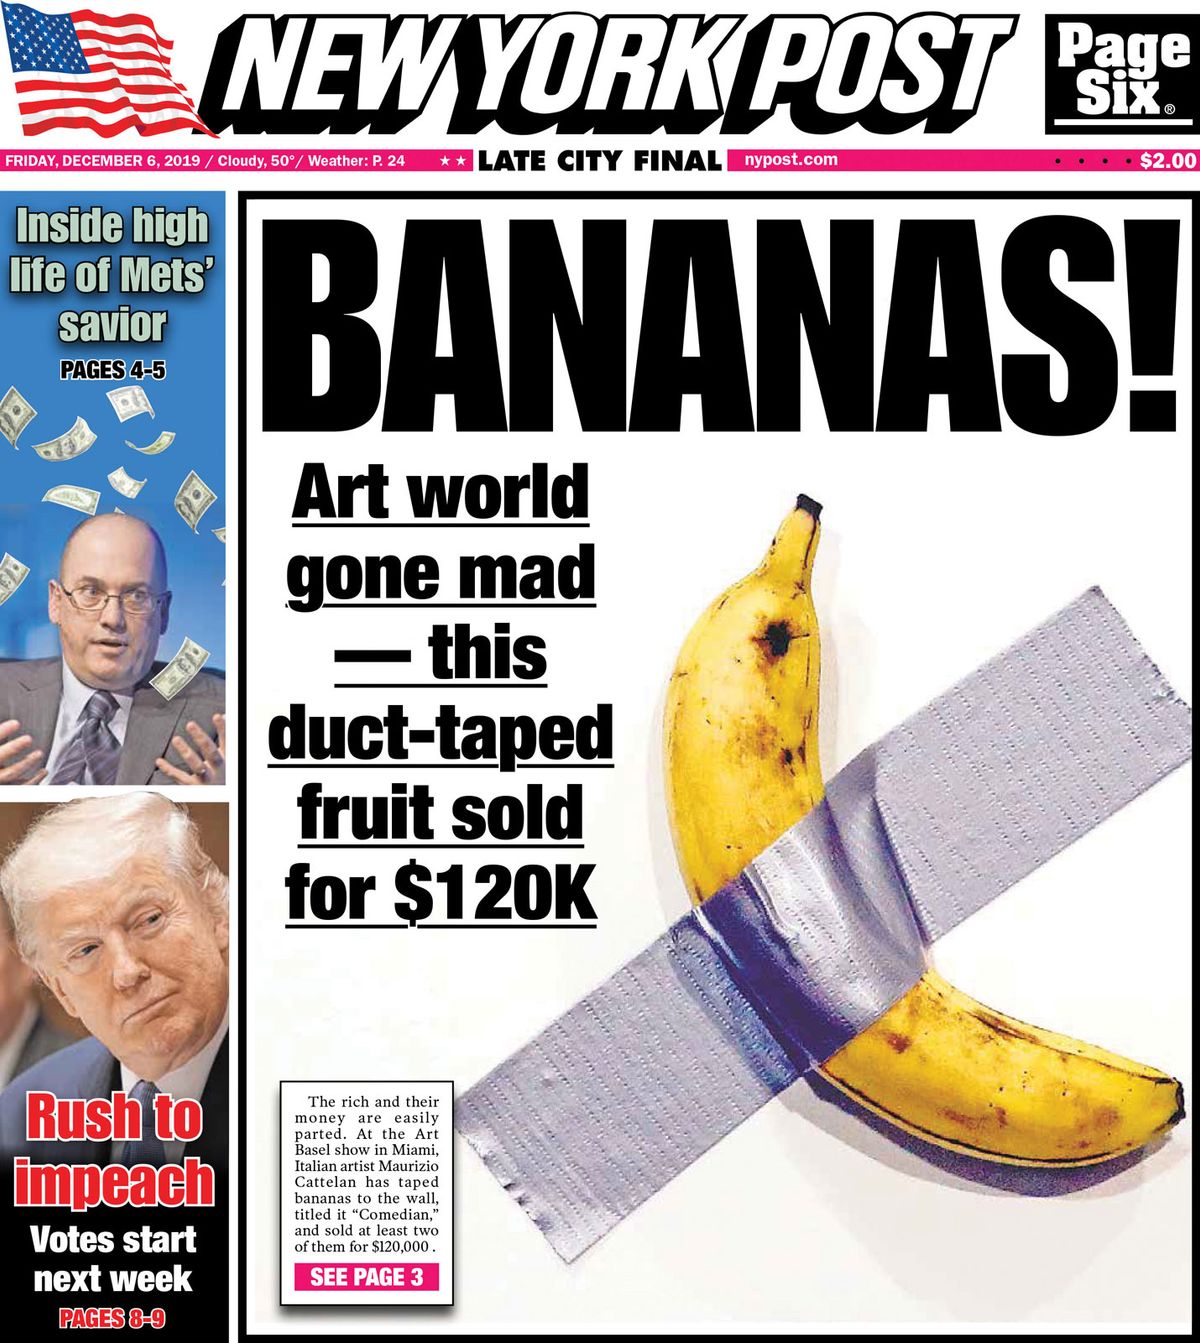 Cattelan's Comedian made the cover of the New York Post © 2019 NYP Holdings